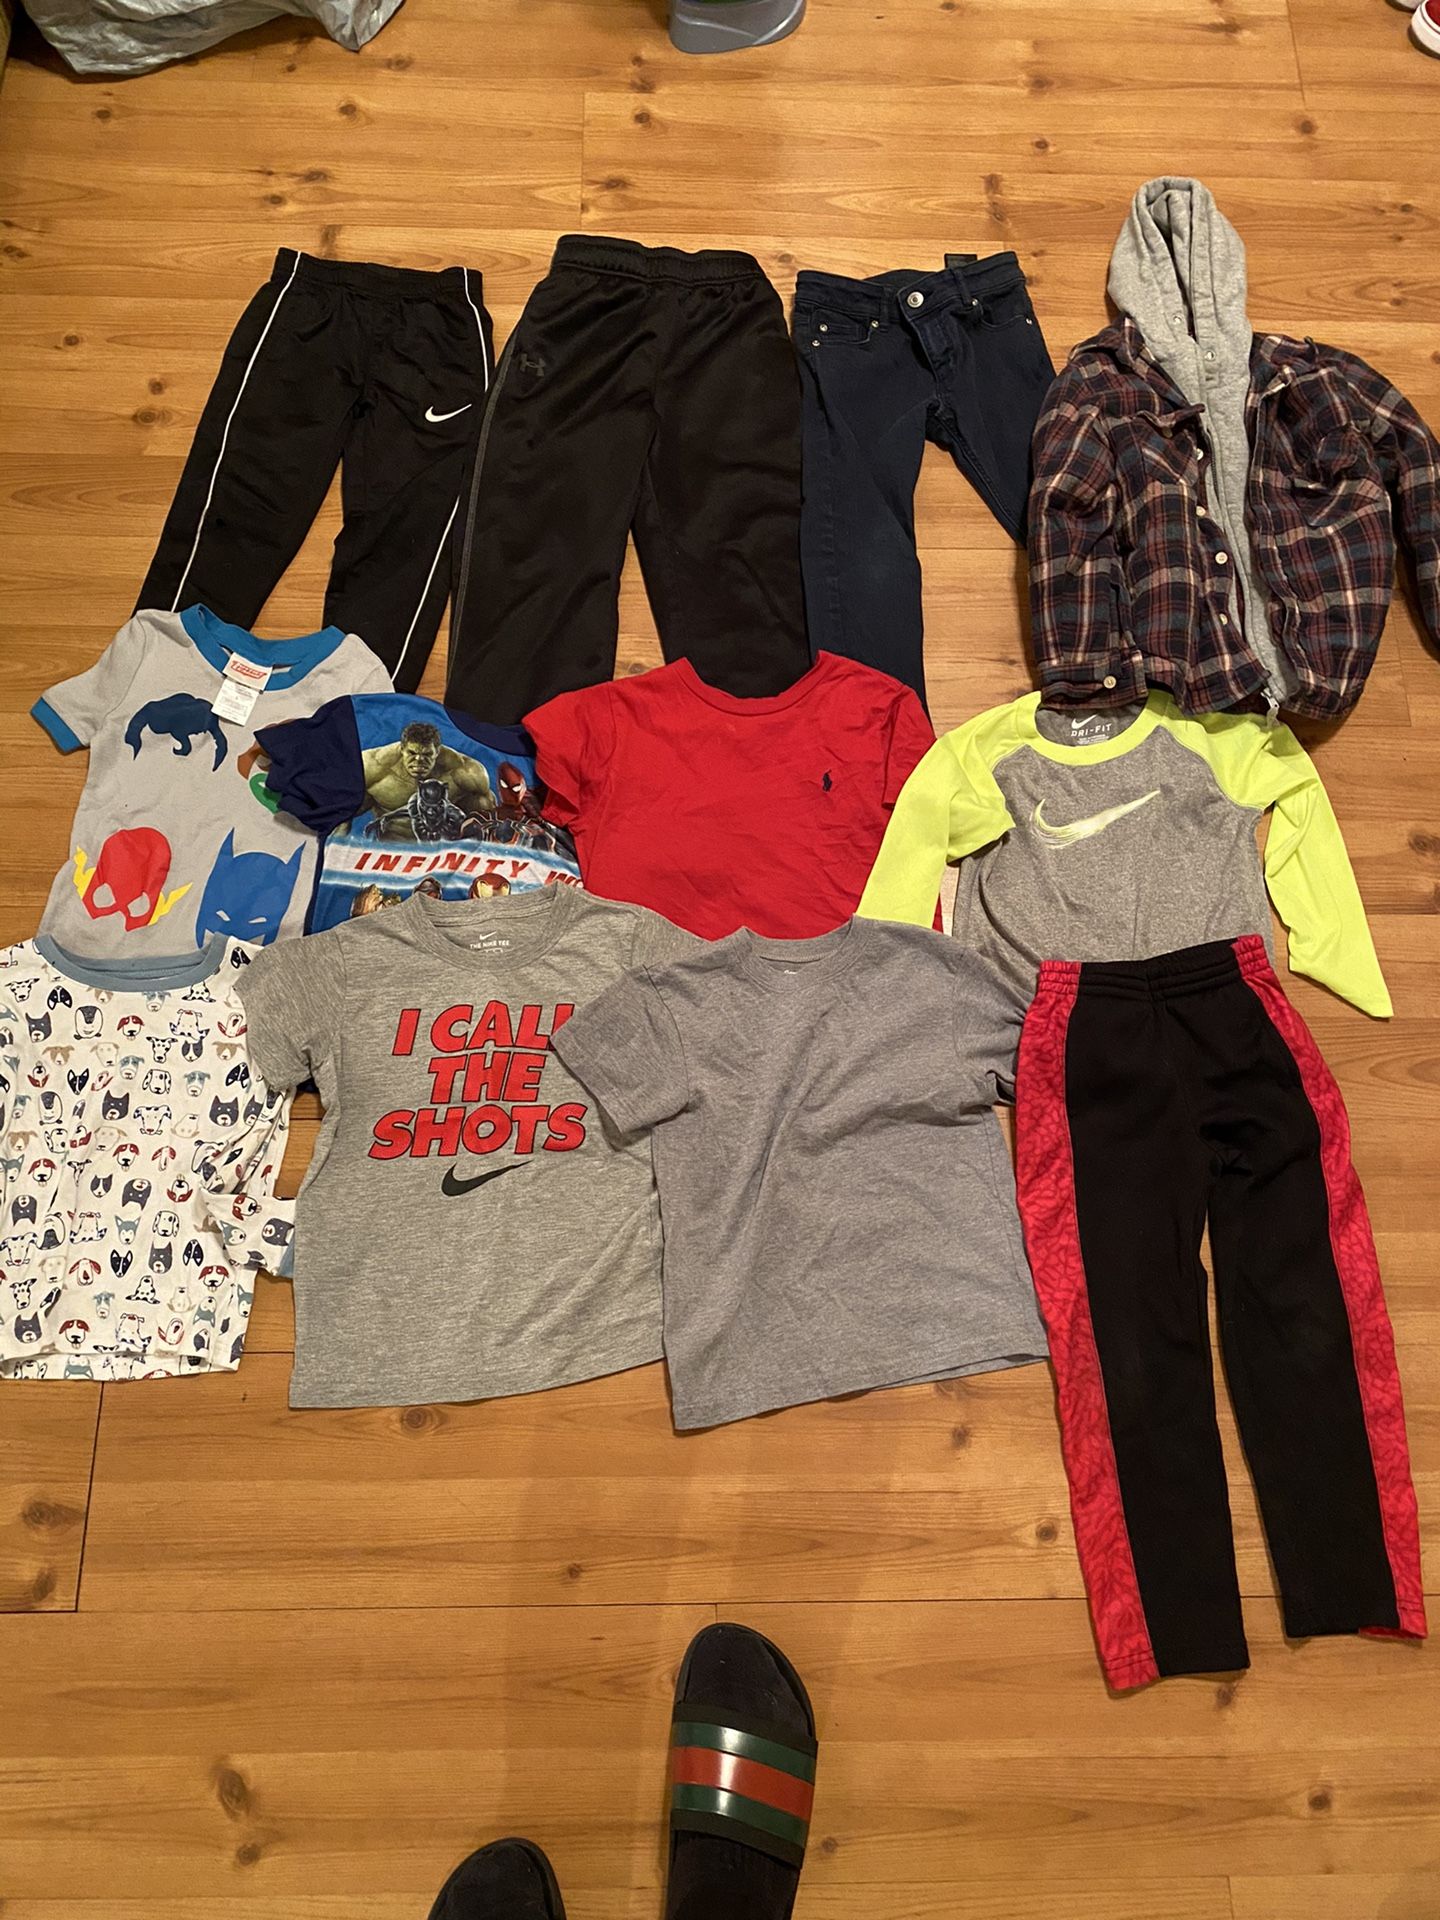 Name brand kid clothes